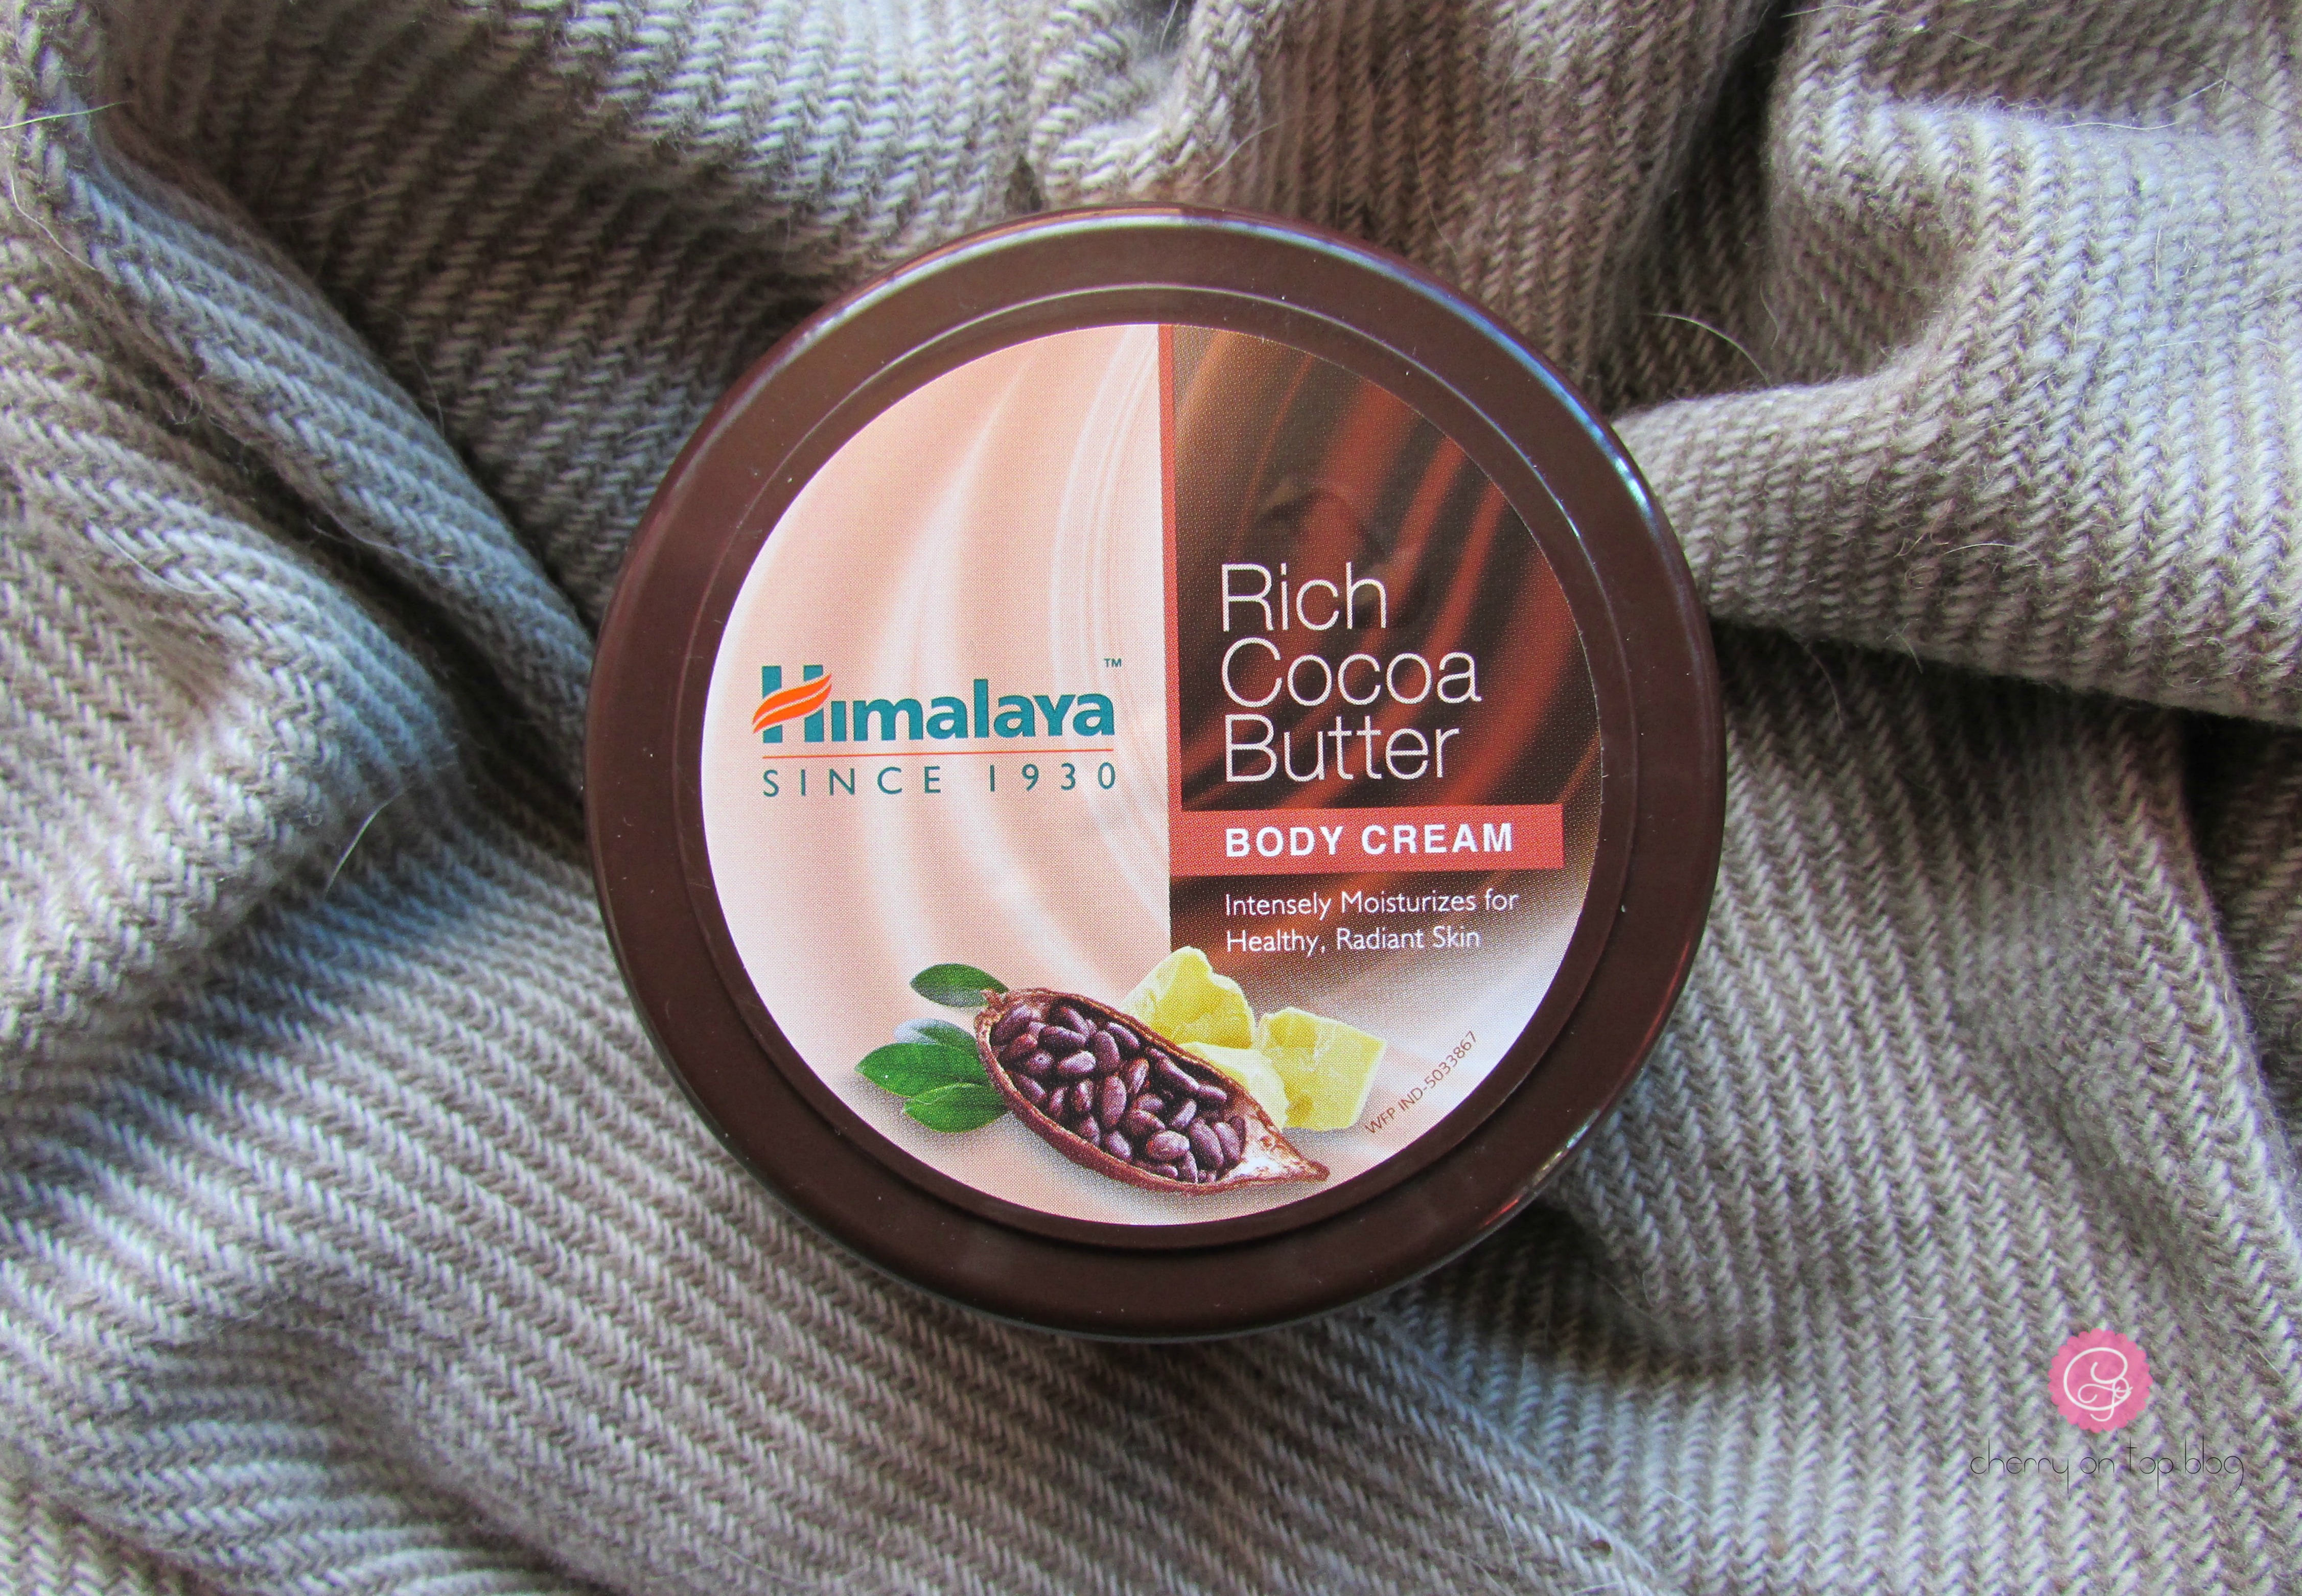 Himalaya Herbals Rich Cocoa Butter Body Cream Review, Price, Buy Online| Cherry On Top